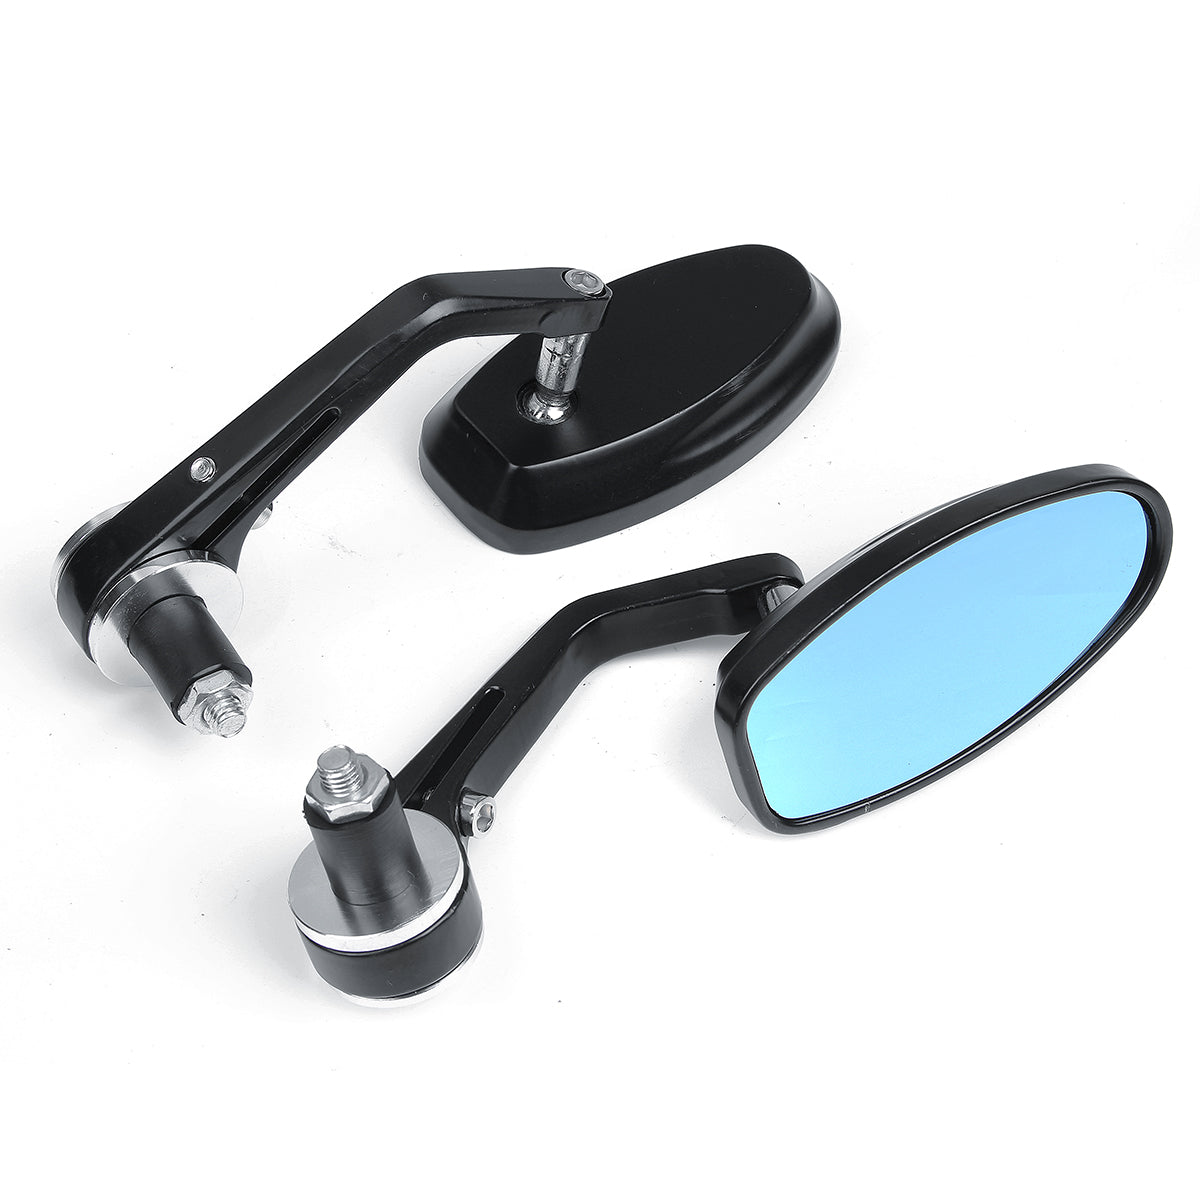 Pale Turquoise 7/8 Inch 22mm Handle Bar Rearview Mirrors For Motorcycle Anti-glare Blue Lenses